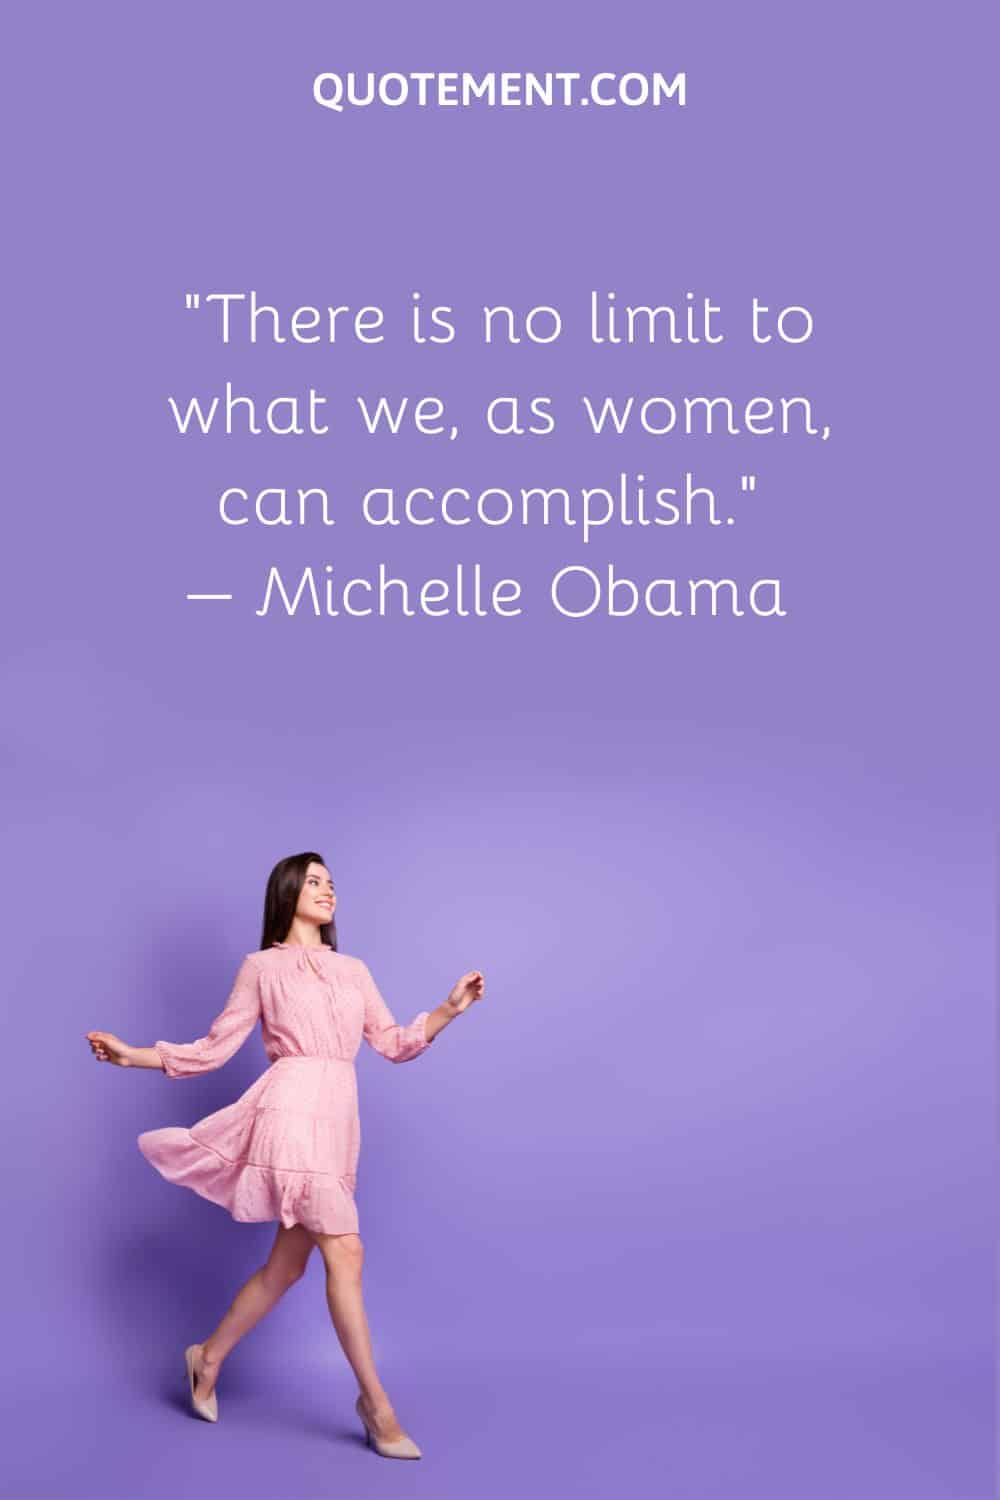 There is no limit to what we, as women, can accomplish